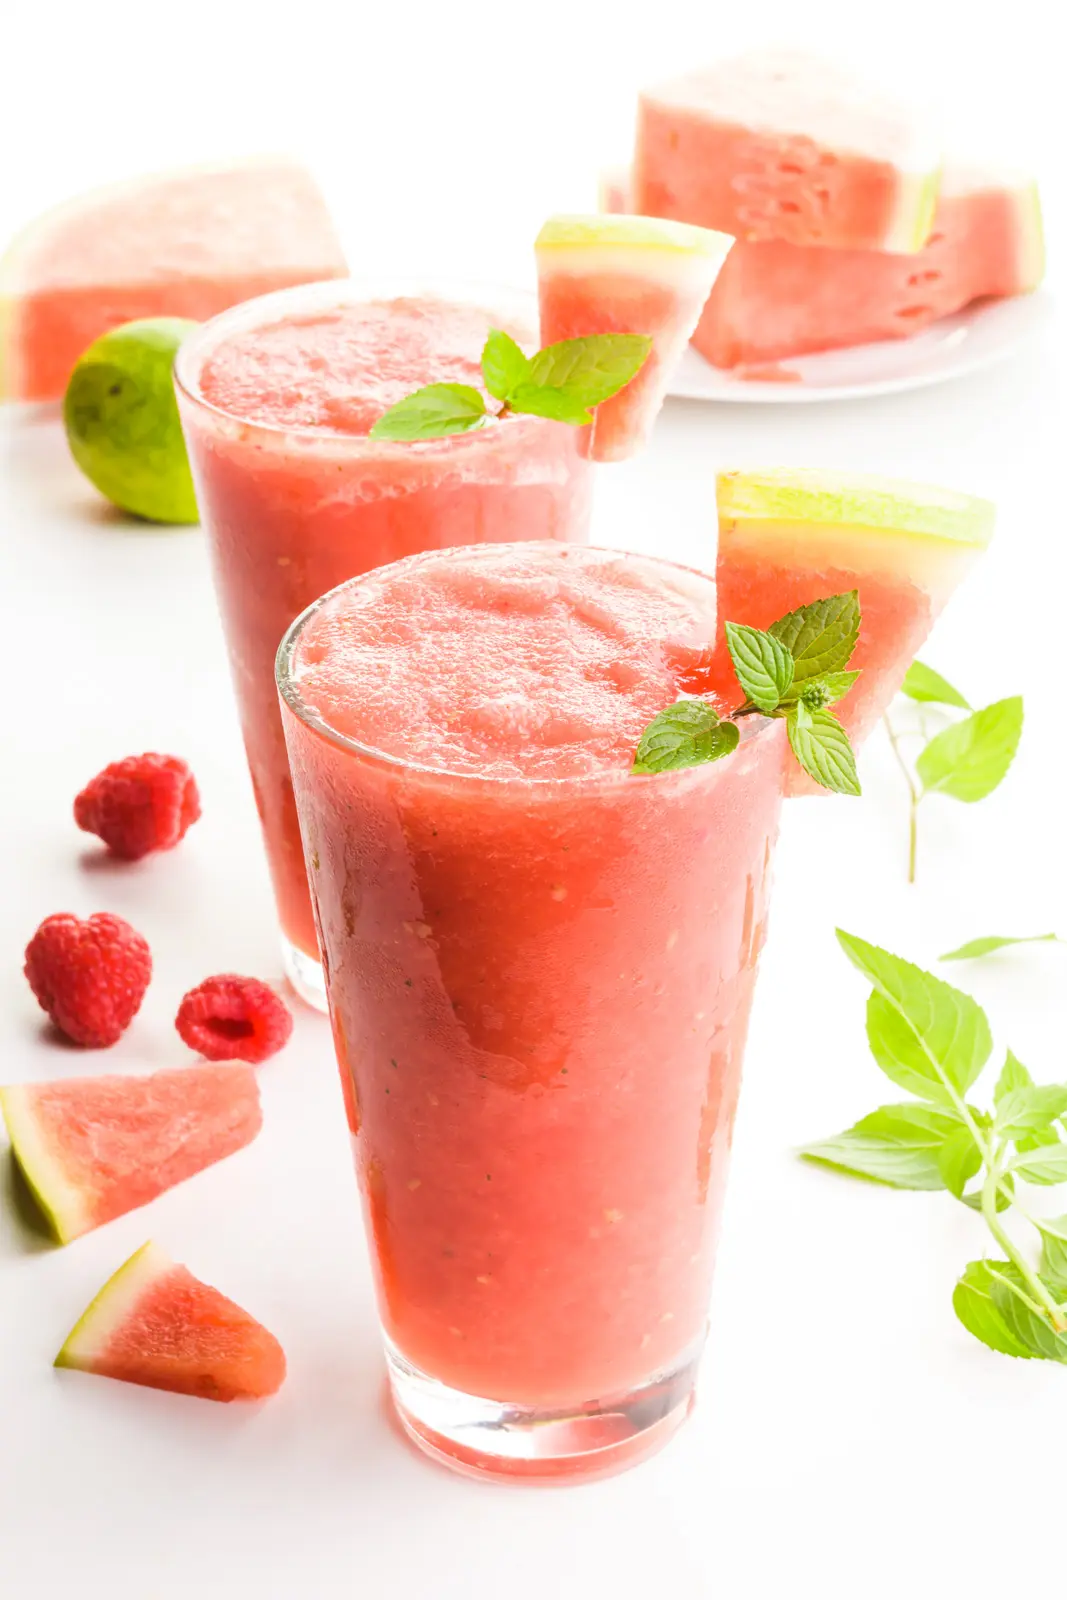 Two glasses full of watermelon slushies have raspberries and mint leaves around them. There are watermelon wedges as garnishes in the drink and also sitting behind the drinks too.